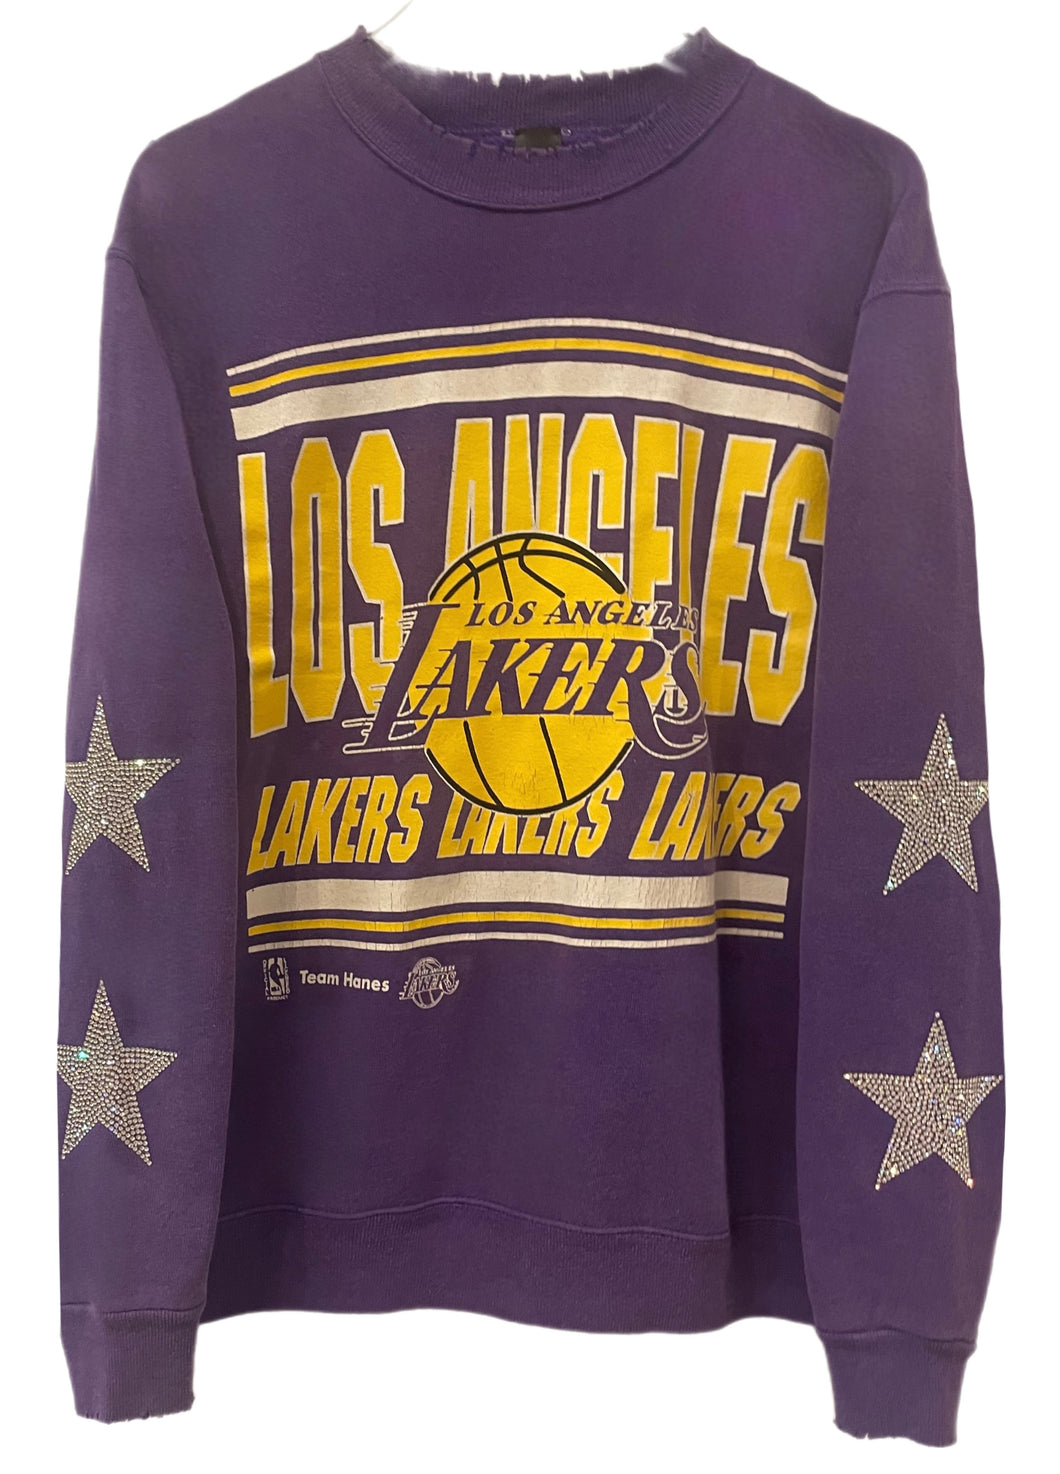 Los Angeles Lakers, NBA One of a KIND Vintage 